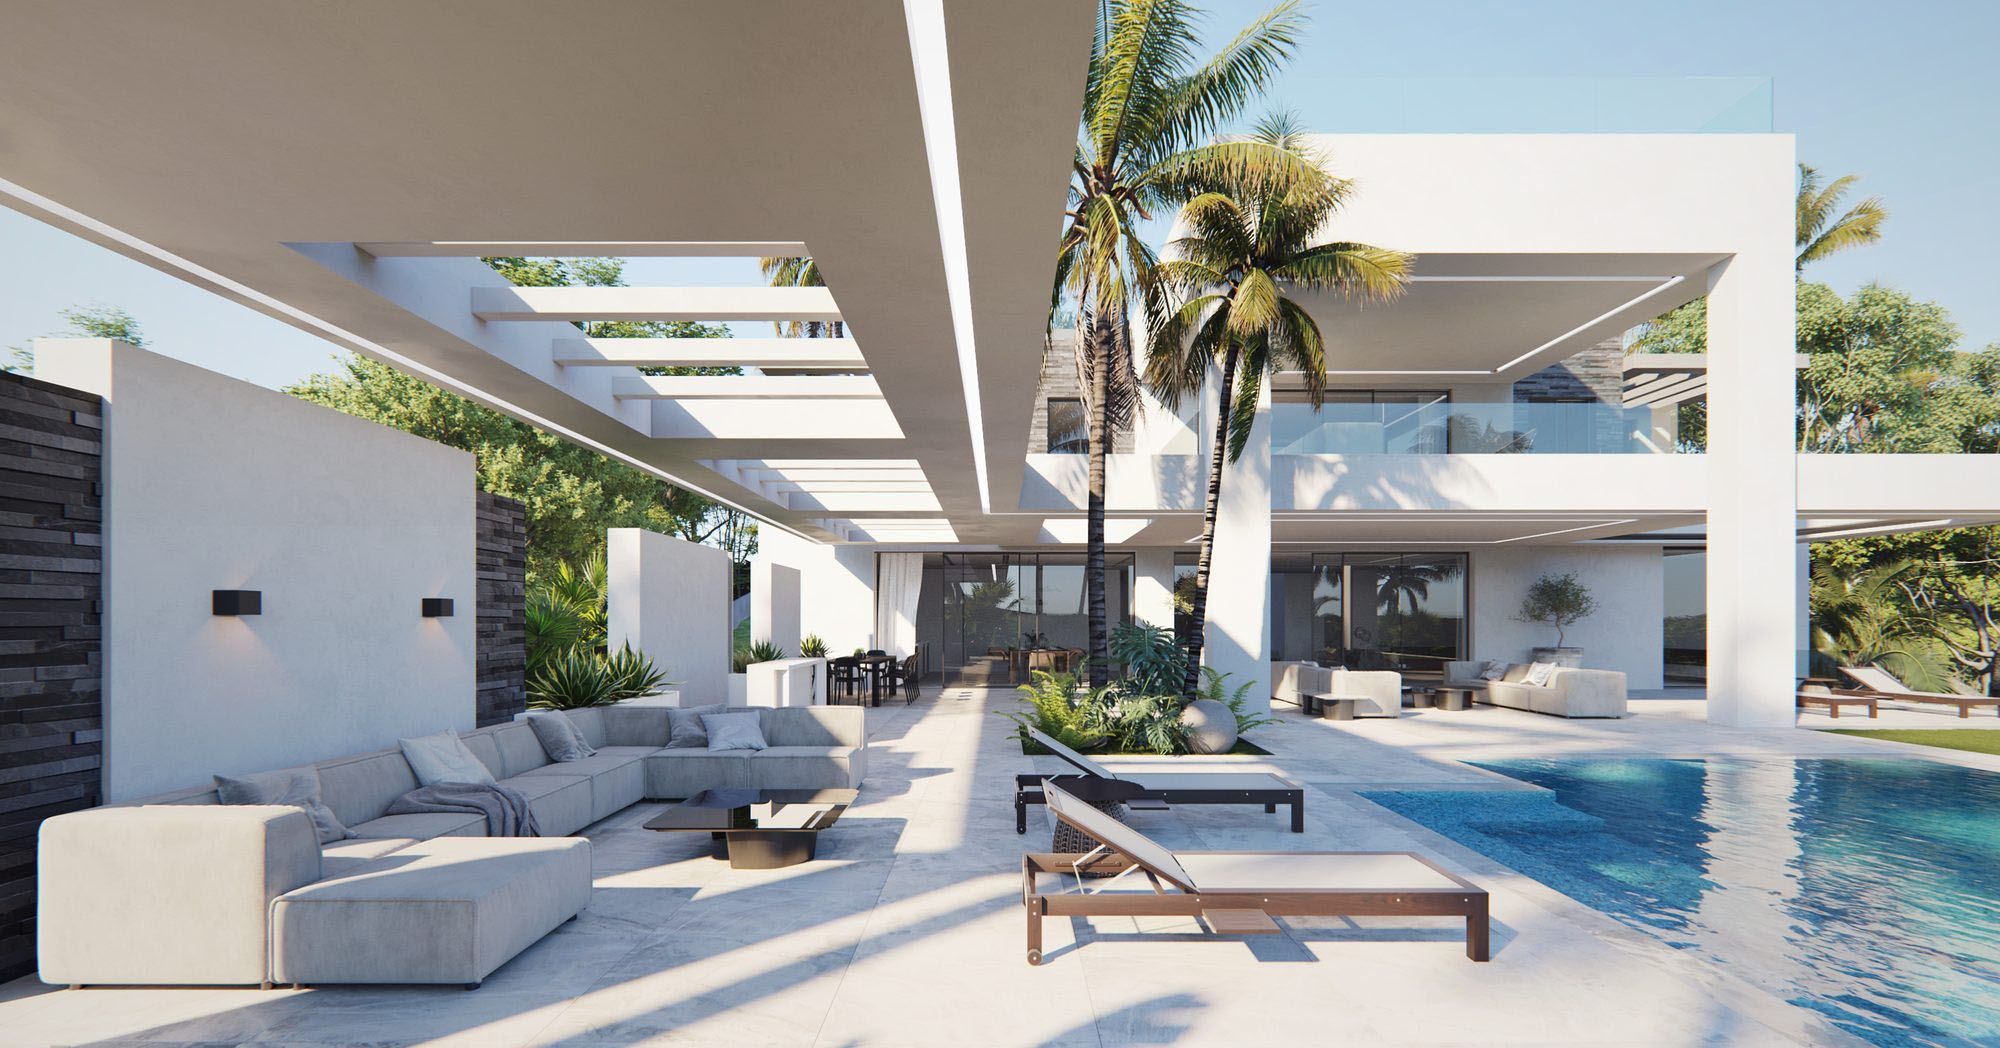 Modern white homes look fantastic in a tropical setting. Outdoor living spaces around an in ground pool.